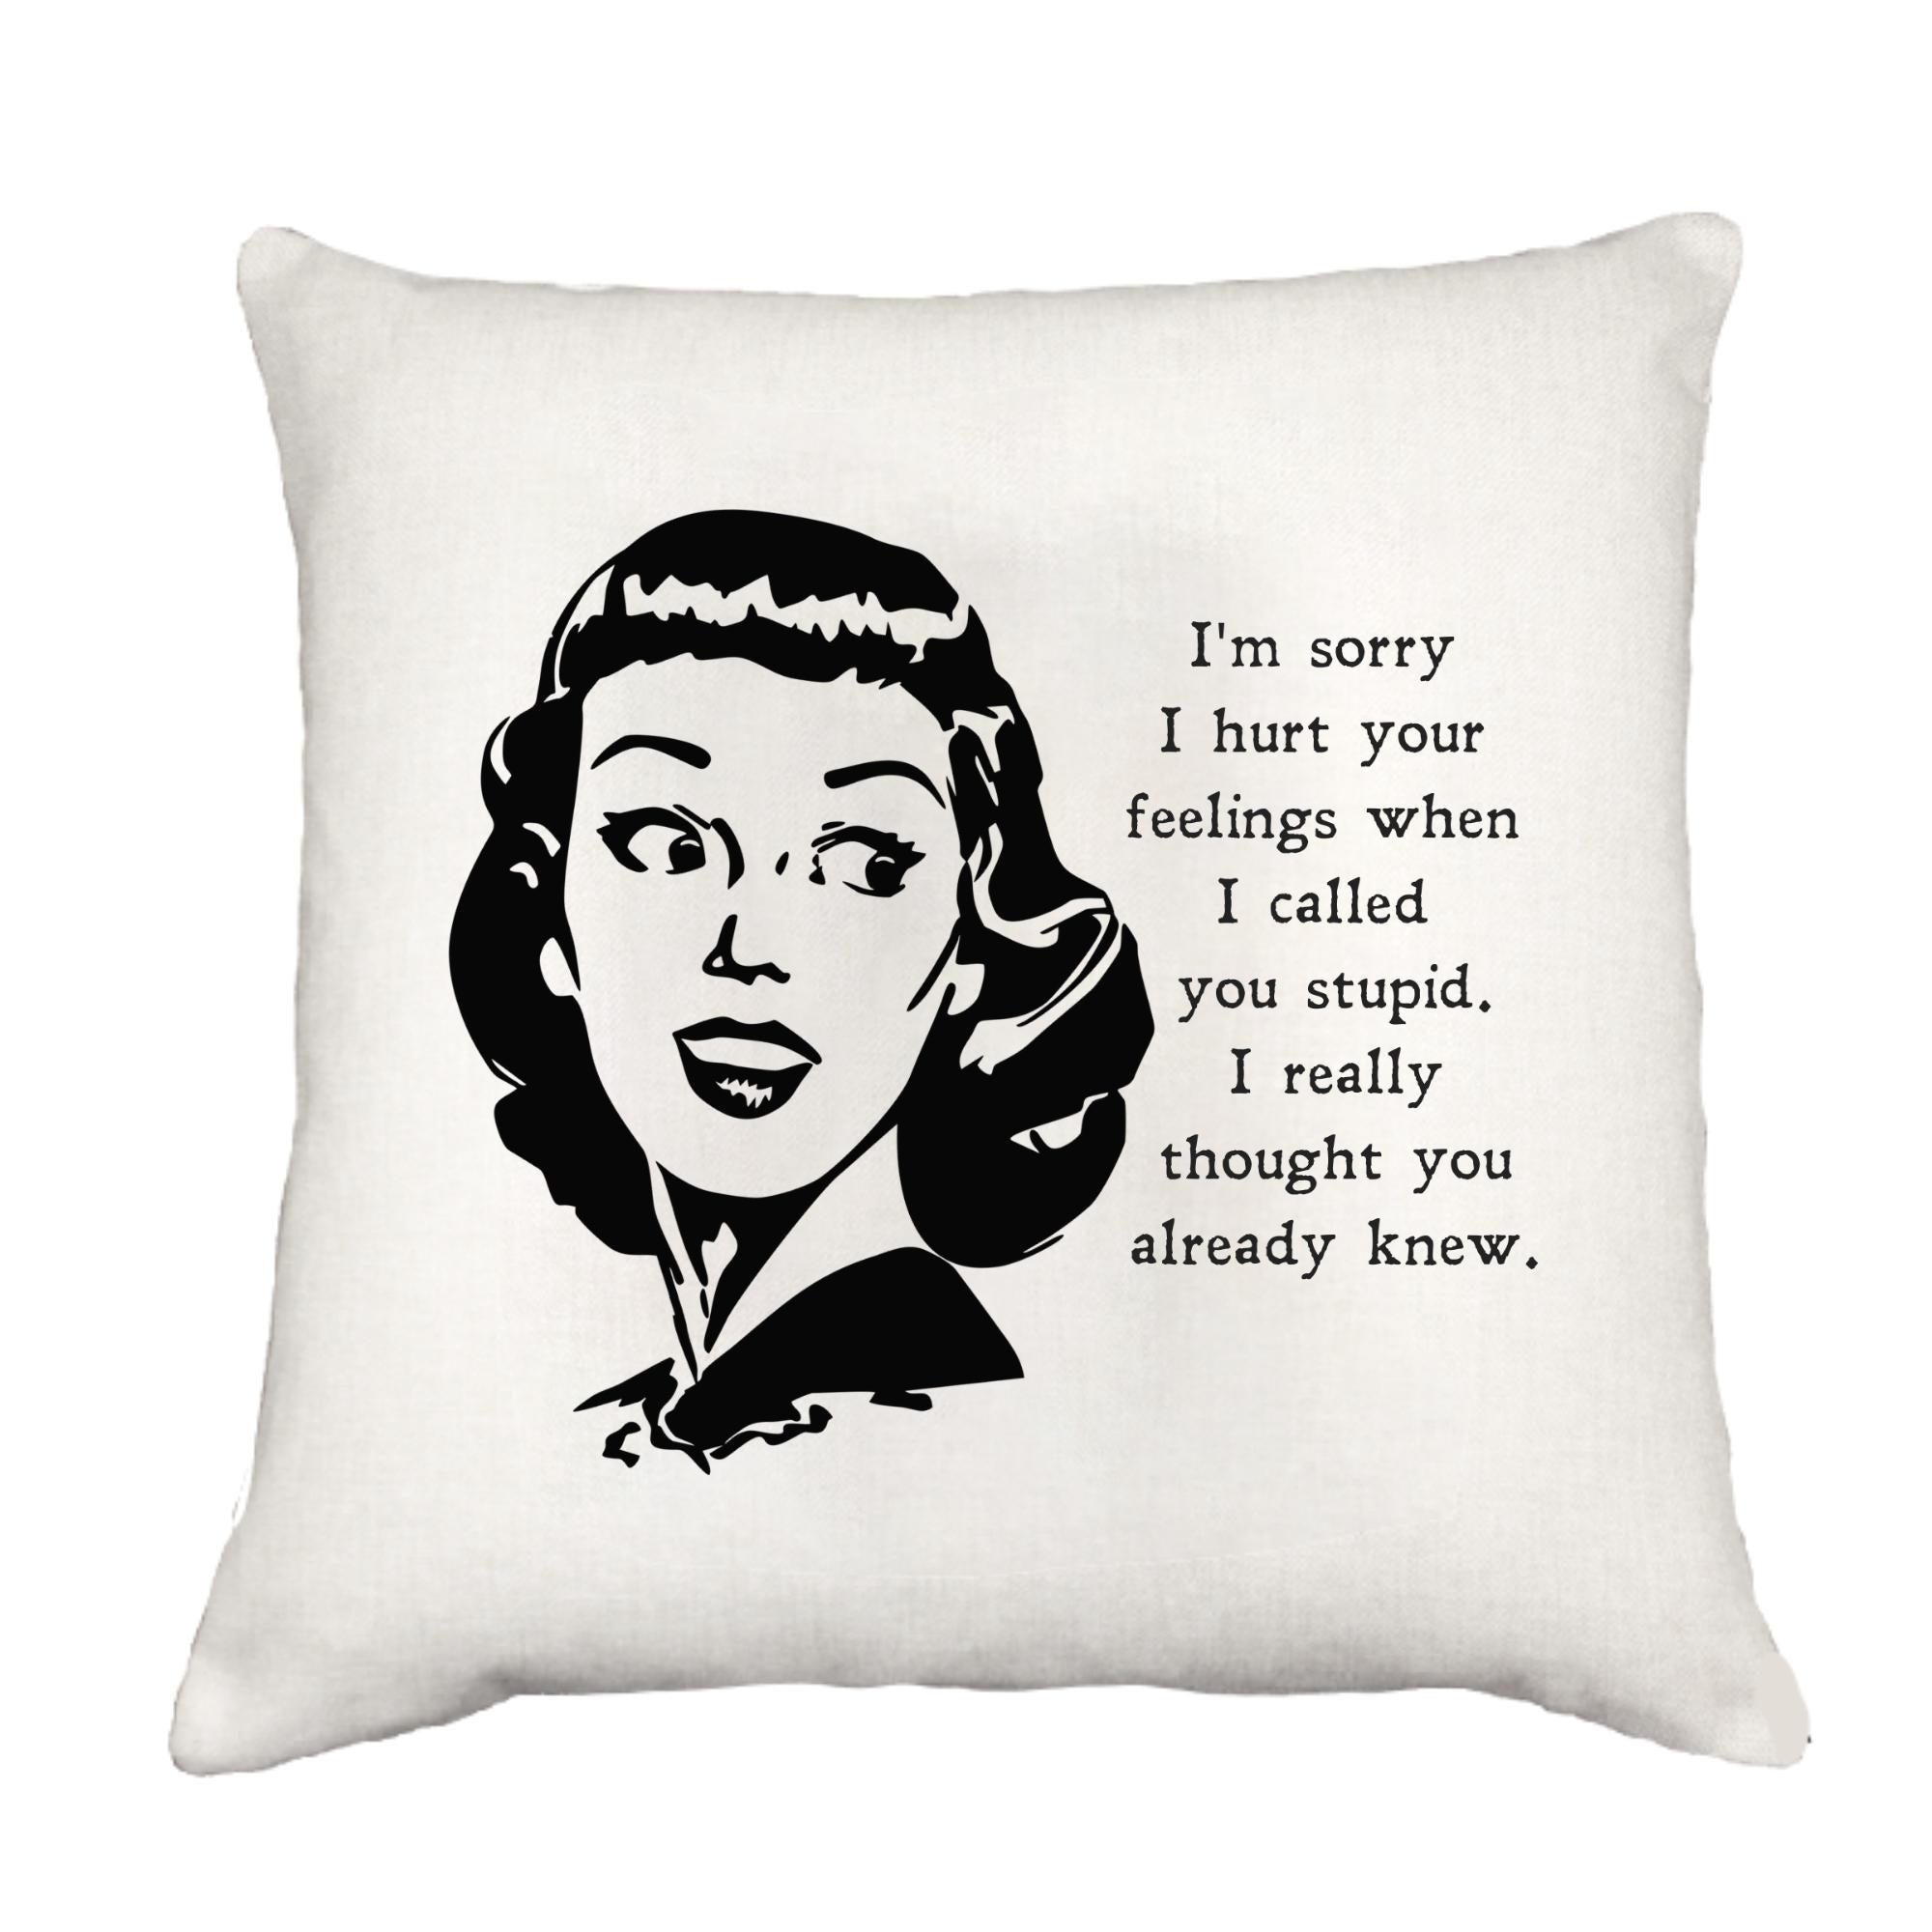 Hurt Your Feelings Cottage Pillow Throw/Decorative Pillow - Southern Sisters